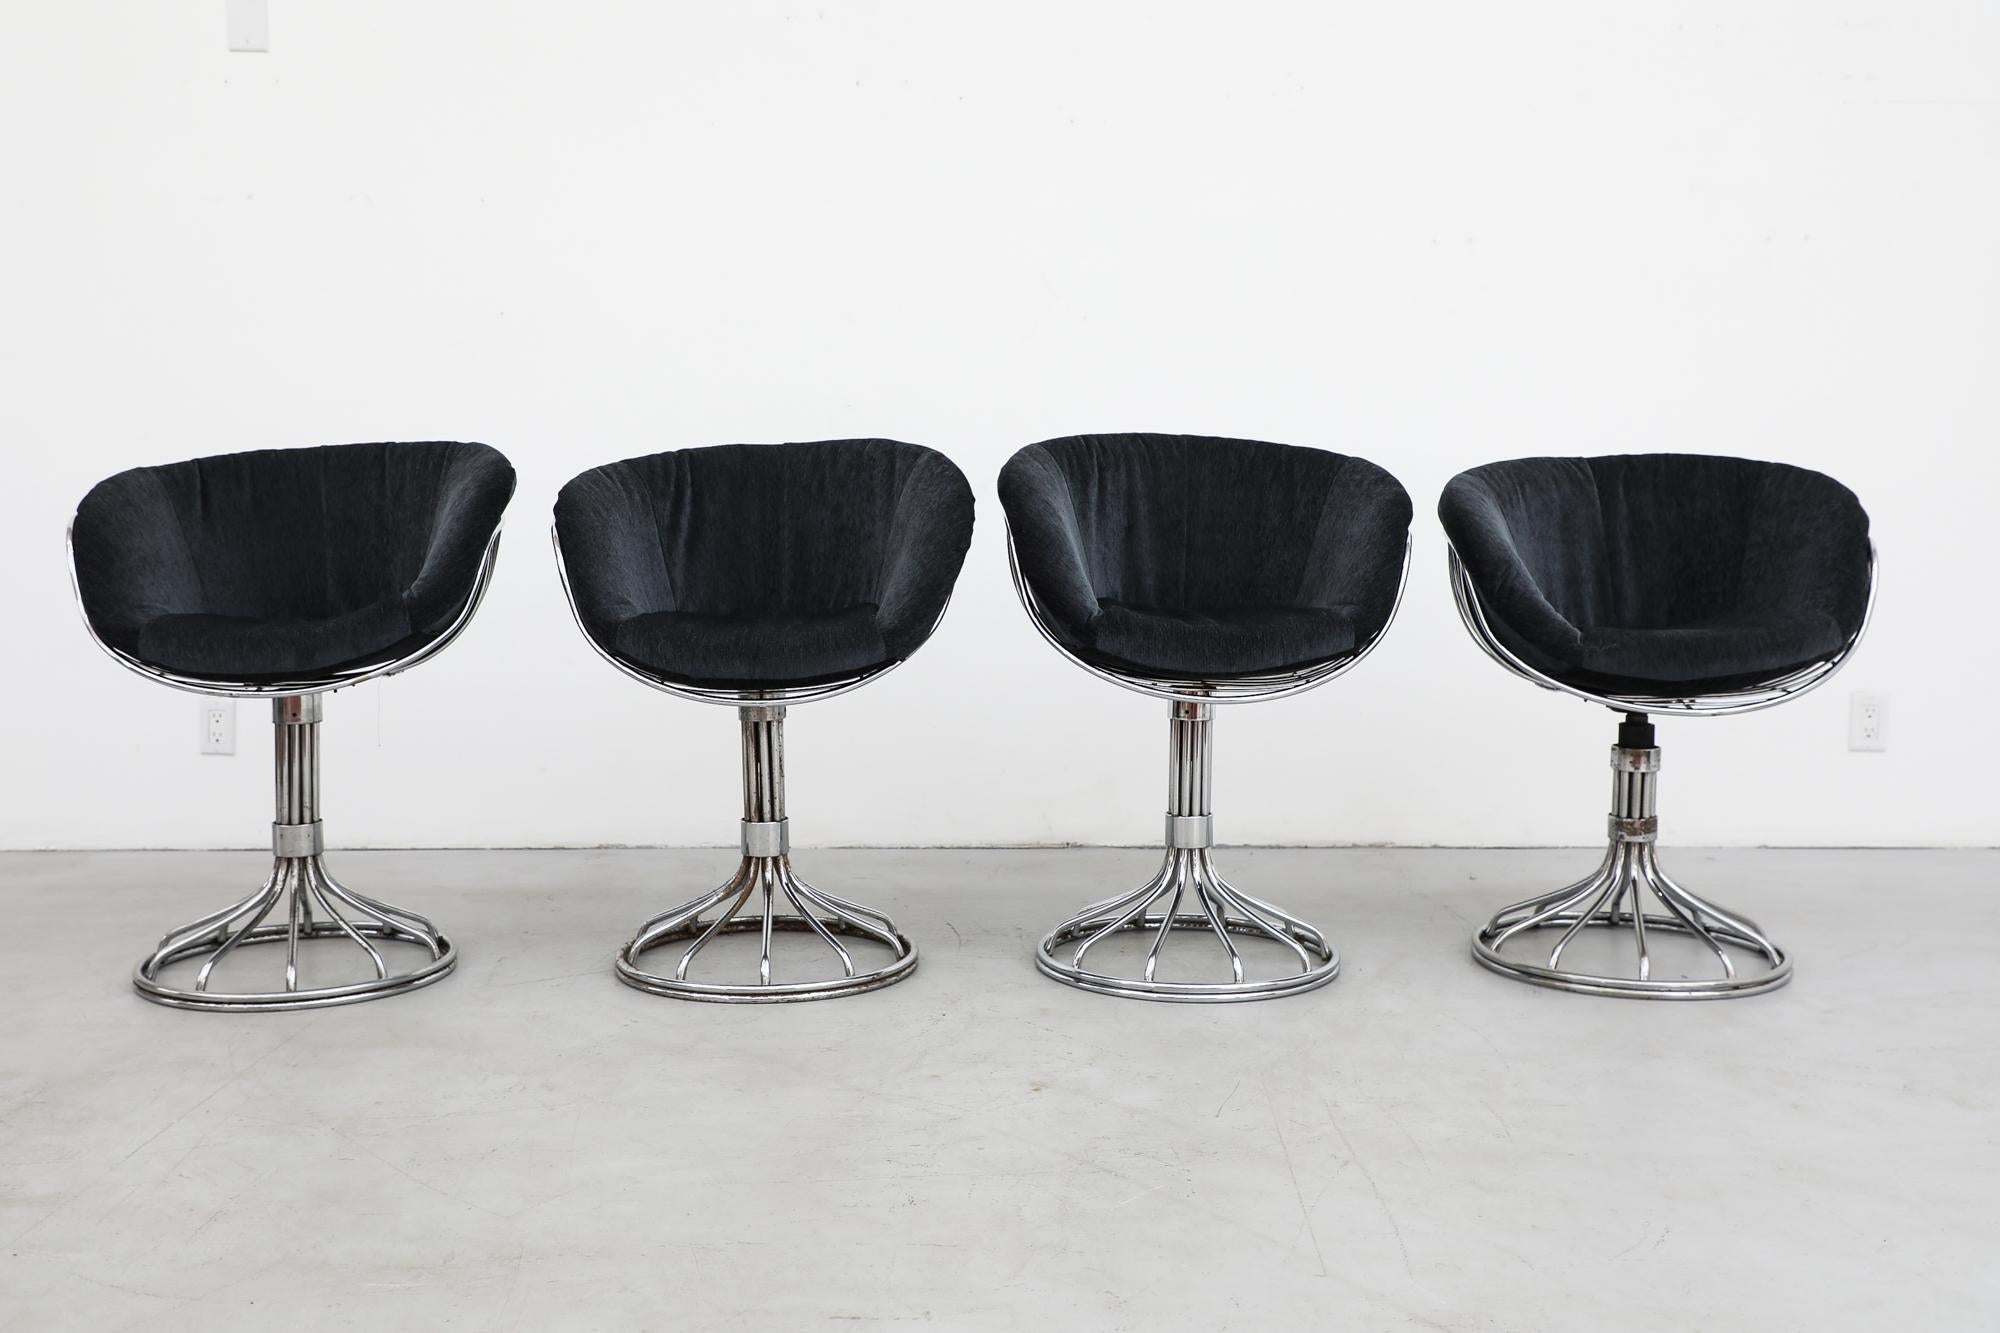 Set of vintage Italian chrome wire frame chairs by Gastone Rinaldi for Rima. Newly upholstered midnight velour cushions on sleek sculptural wire frames with swivel pedestal bases. The frames are in VERY original condition with HEAVY patina, and